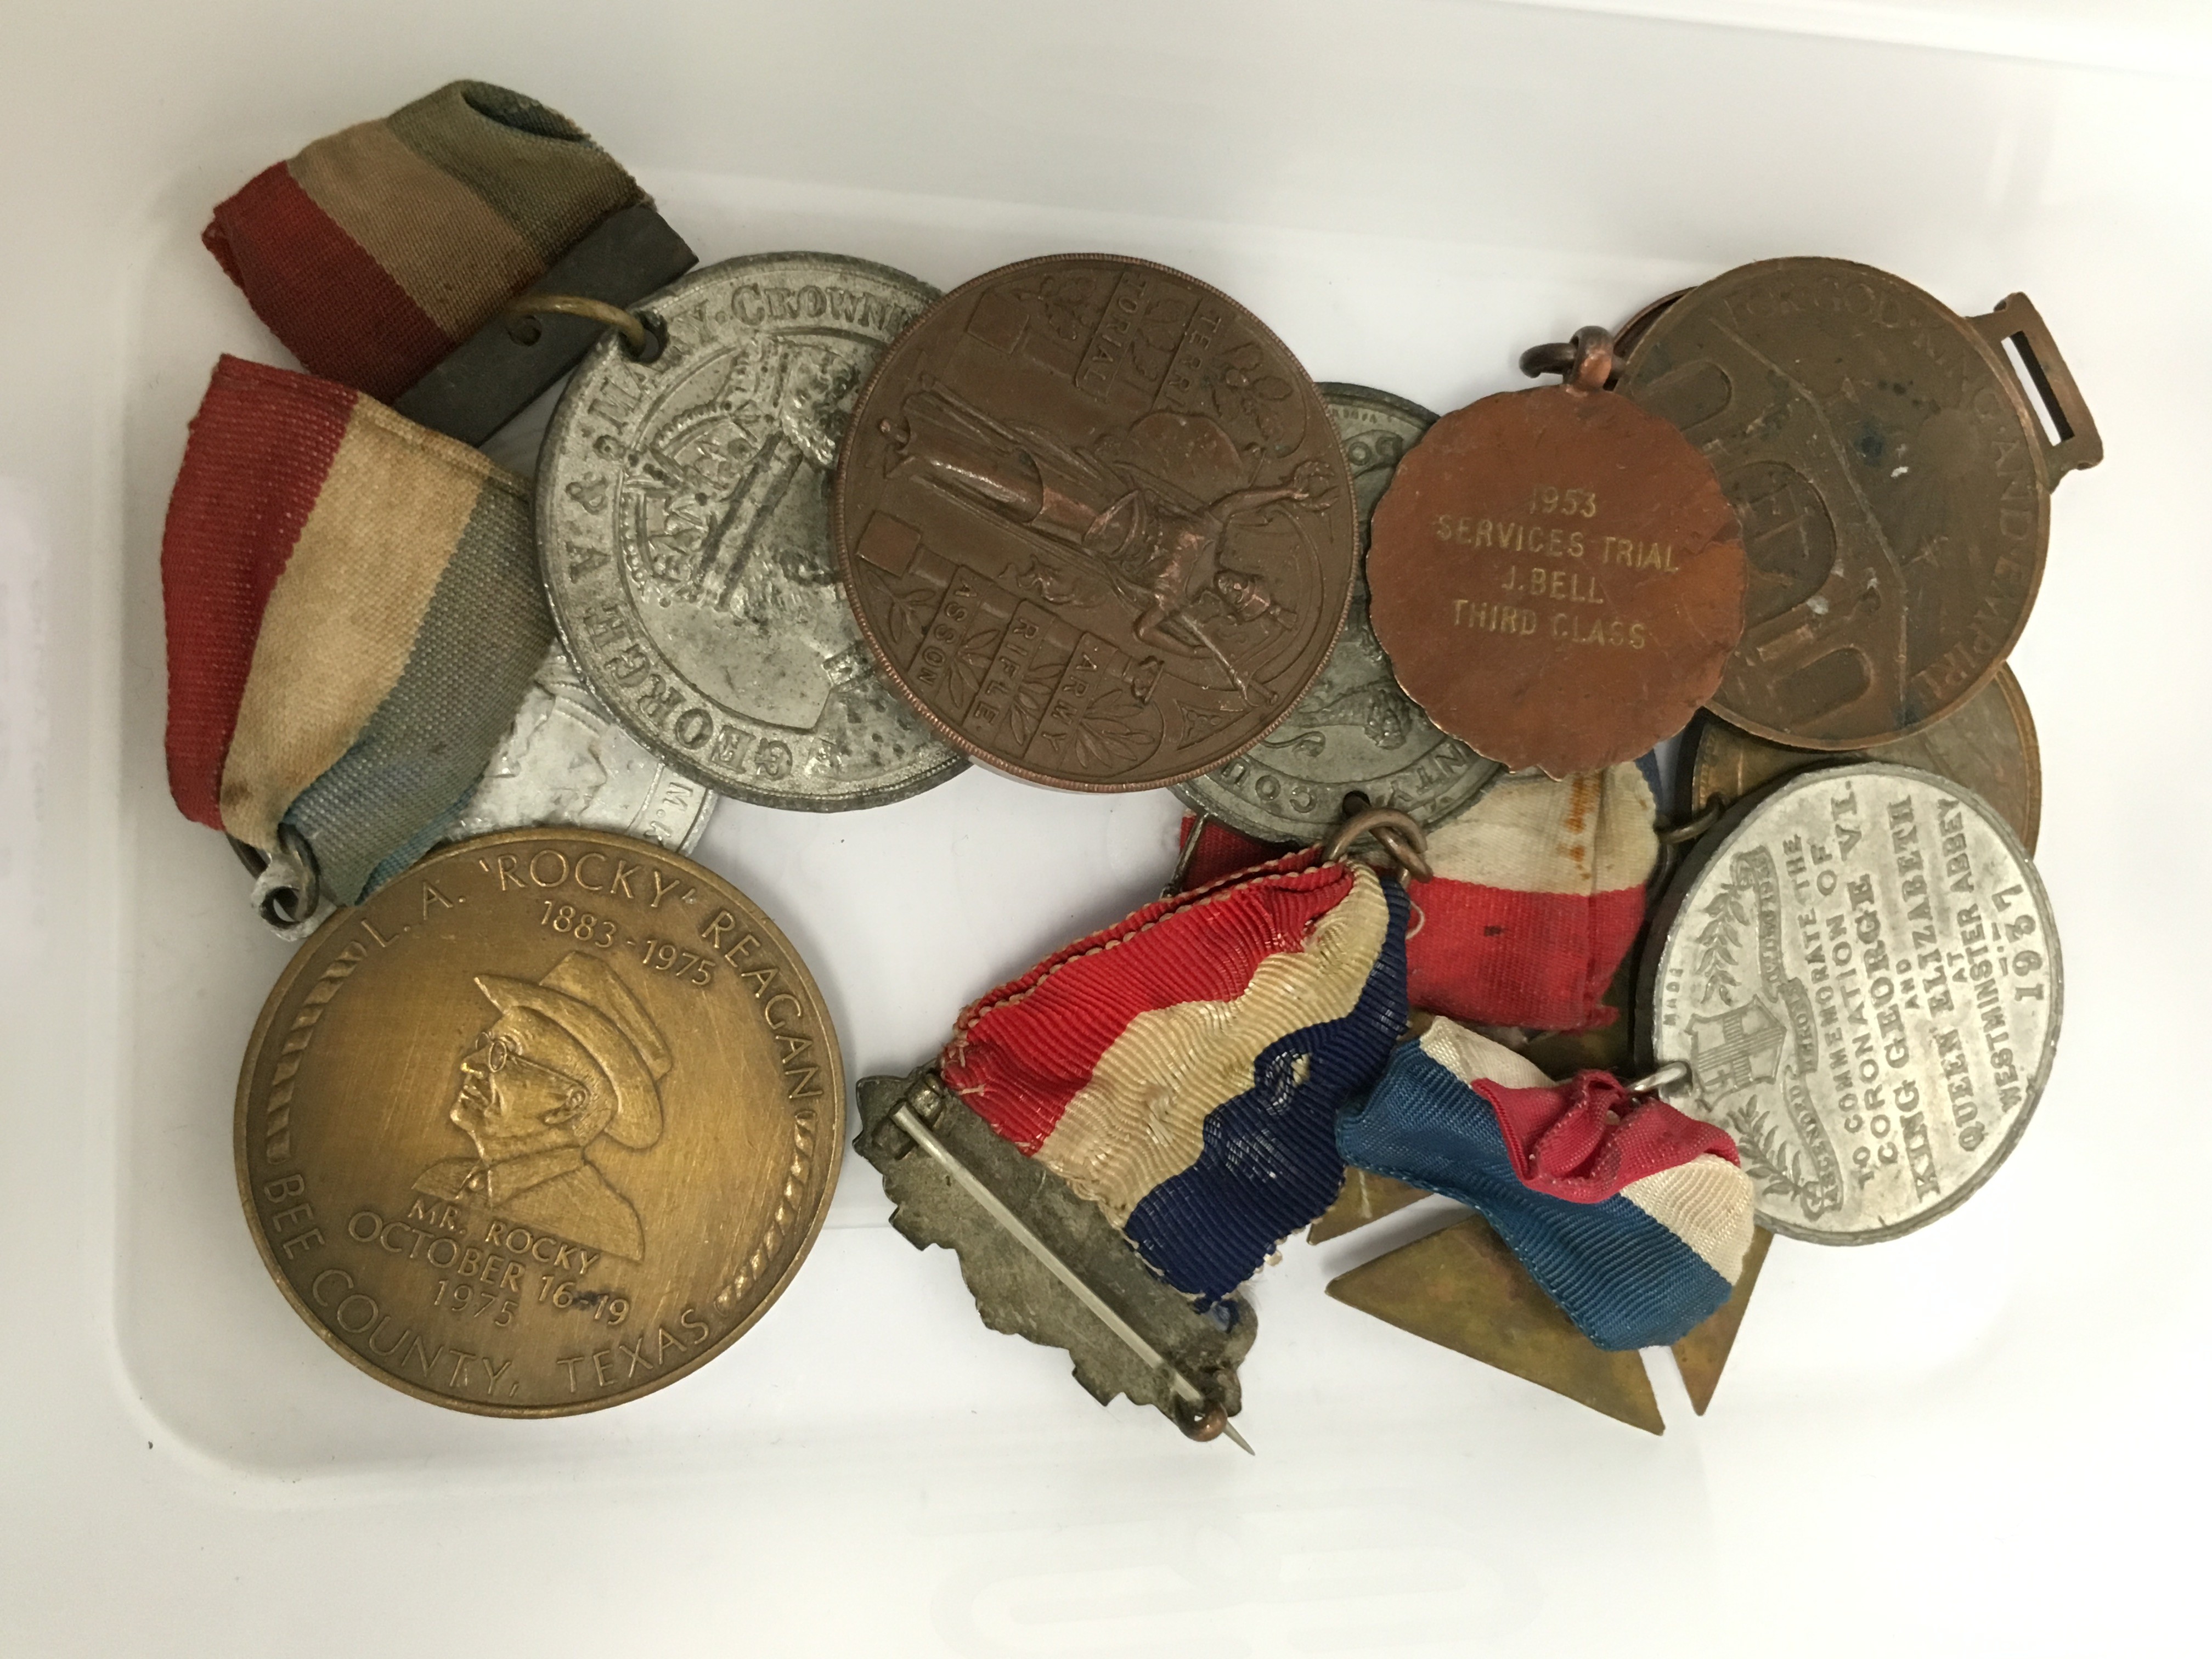 A carton containing various Attendance and other medals.